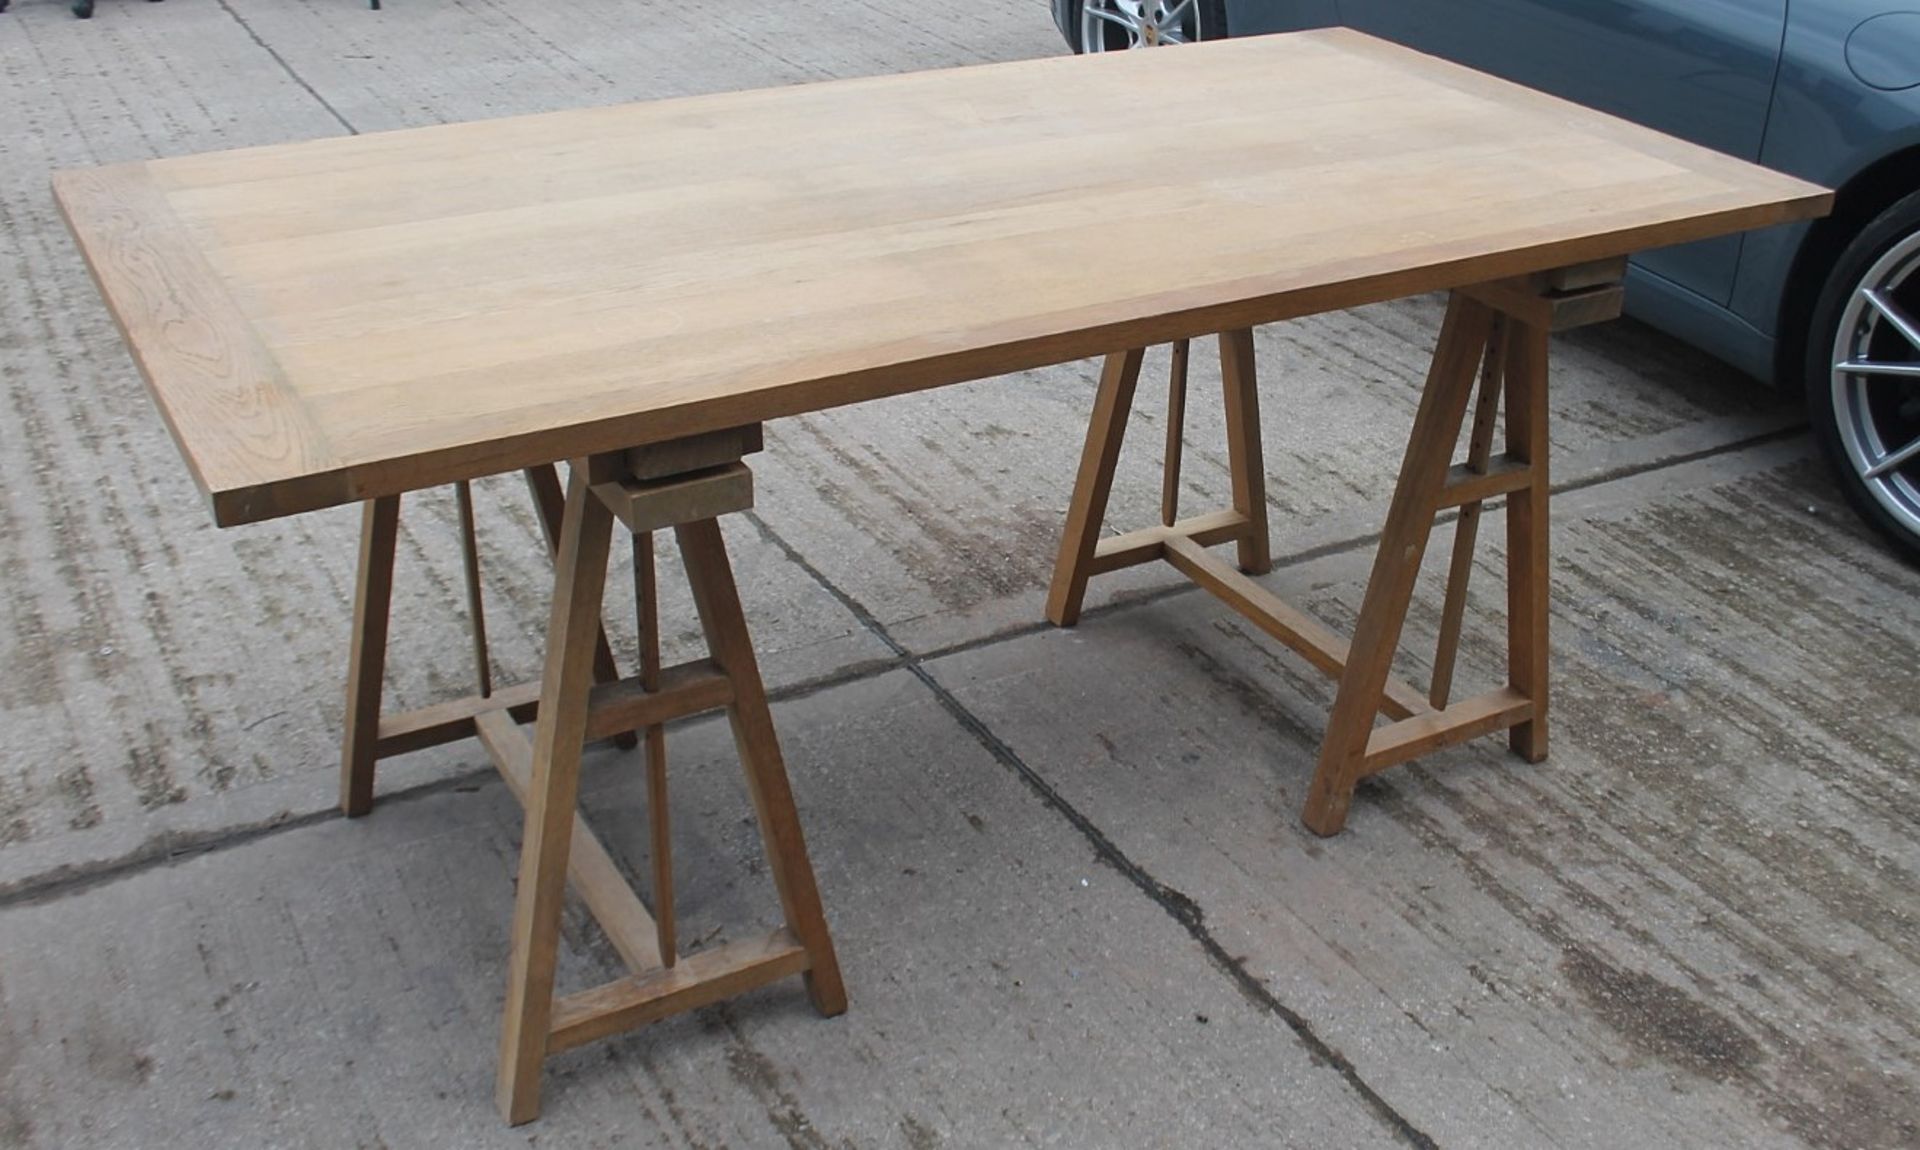 1 x Solid Wood Trestle Dining Table - Recently Relocated From An Exclusive Property - RRP £750.00 - Image 2 of 10